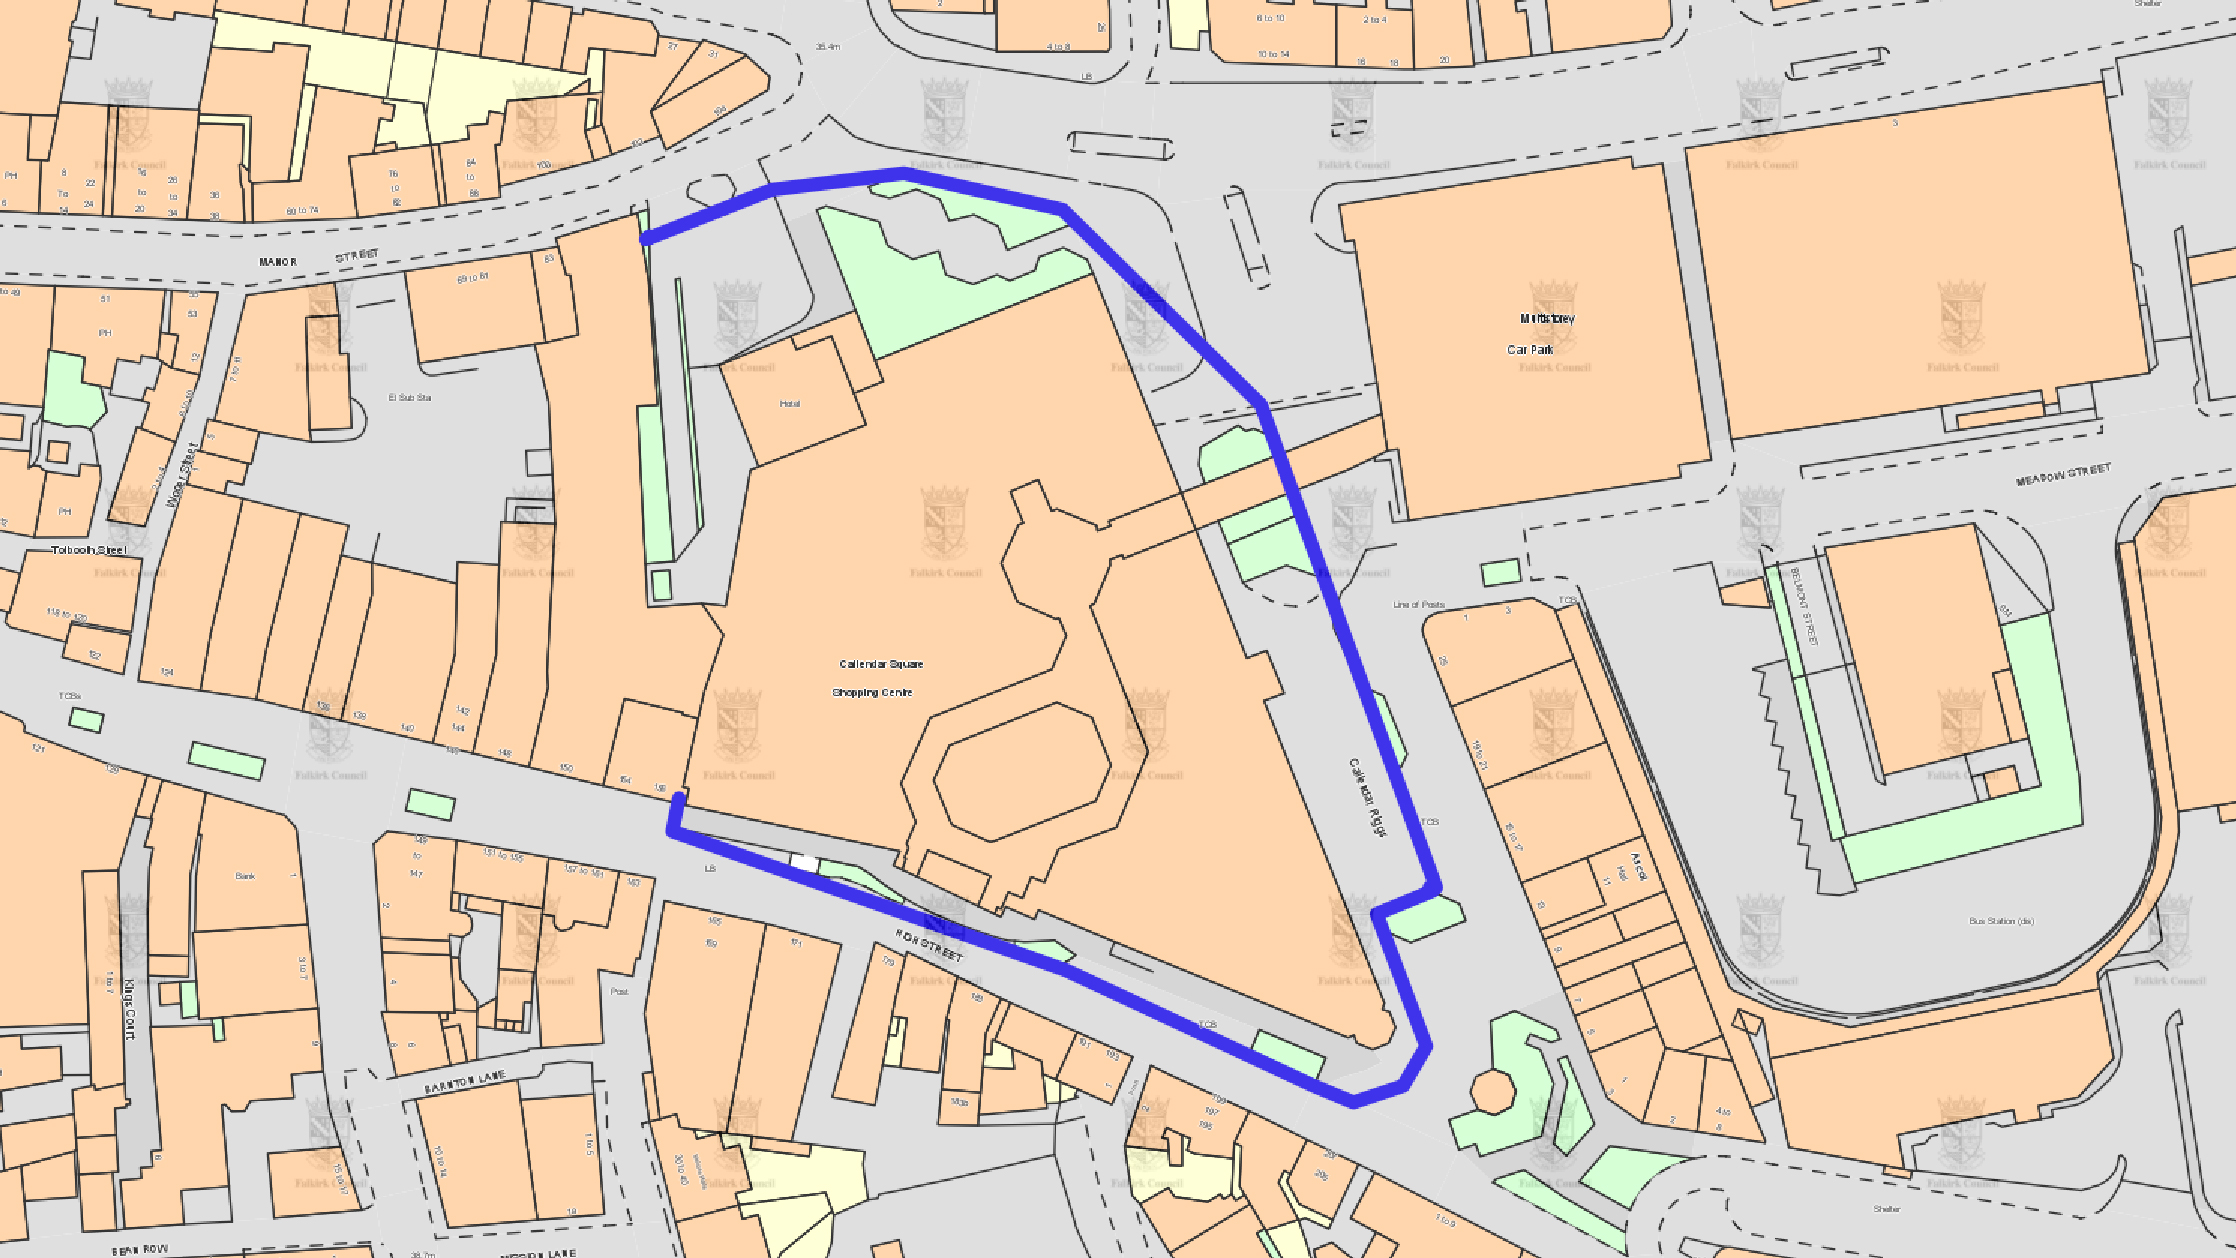 A map showing the footpath diversion around Callendar Square.